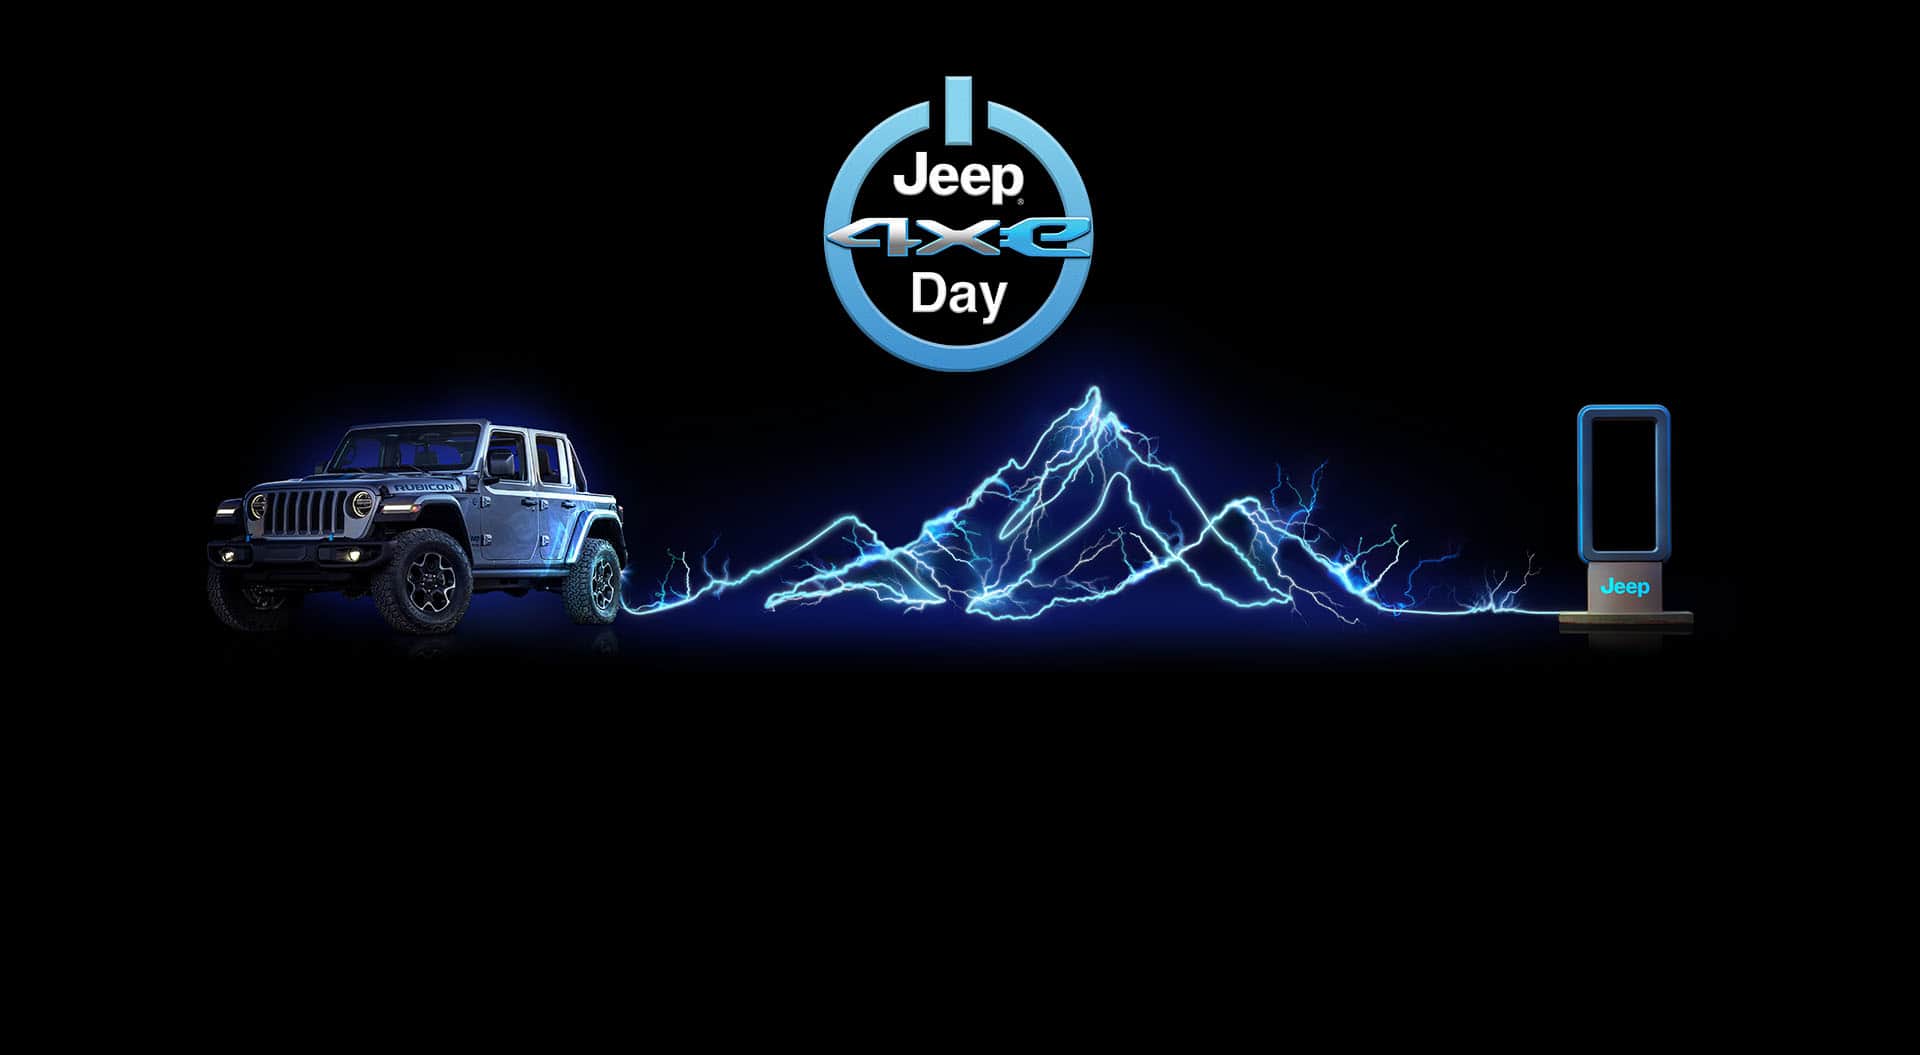 A 2023 Jeep Wrangler Rubicon 4xe with arcing electricity forming the shape of a mountain range and connecting it with a Jeep charging station. The Jeep 4xe Day logo.